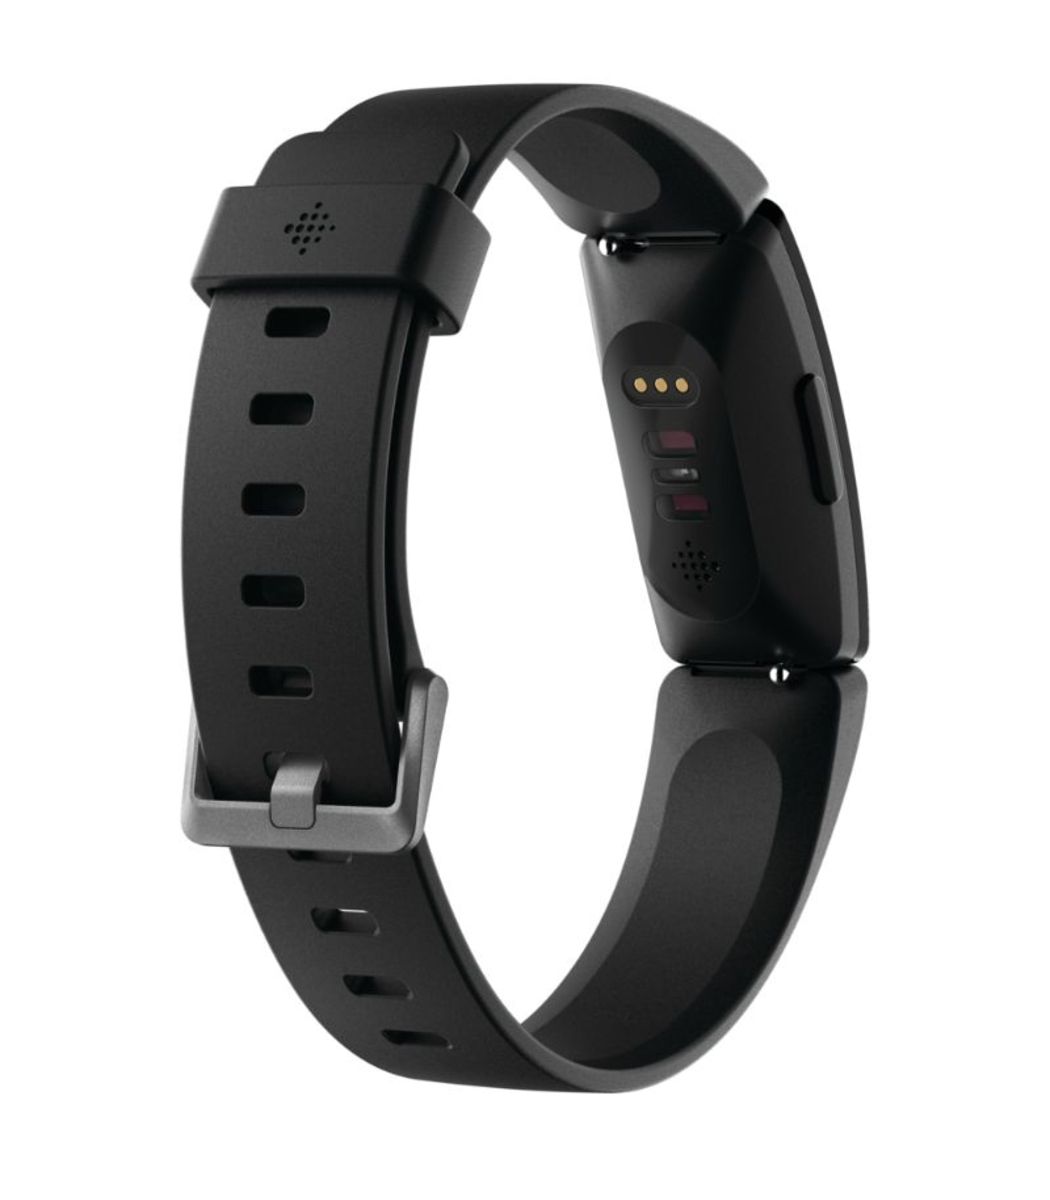 Fitbit Inspire HR Fitness Tracker + Heart Rate, Black, Small and Large Wristbands - image 5 of 9